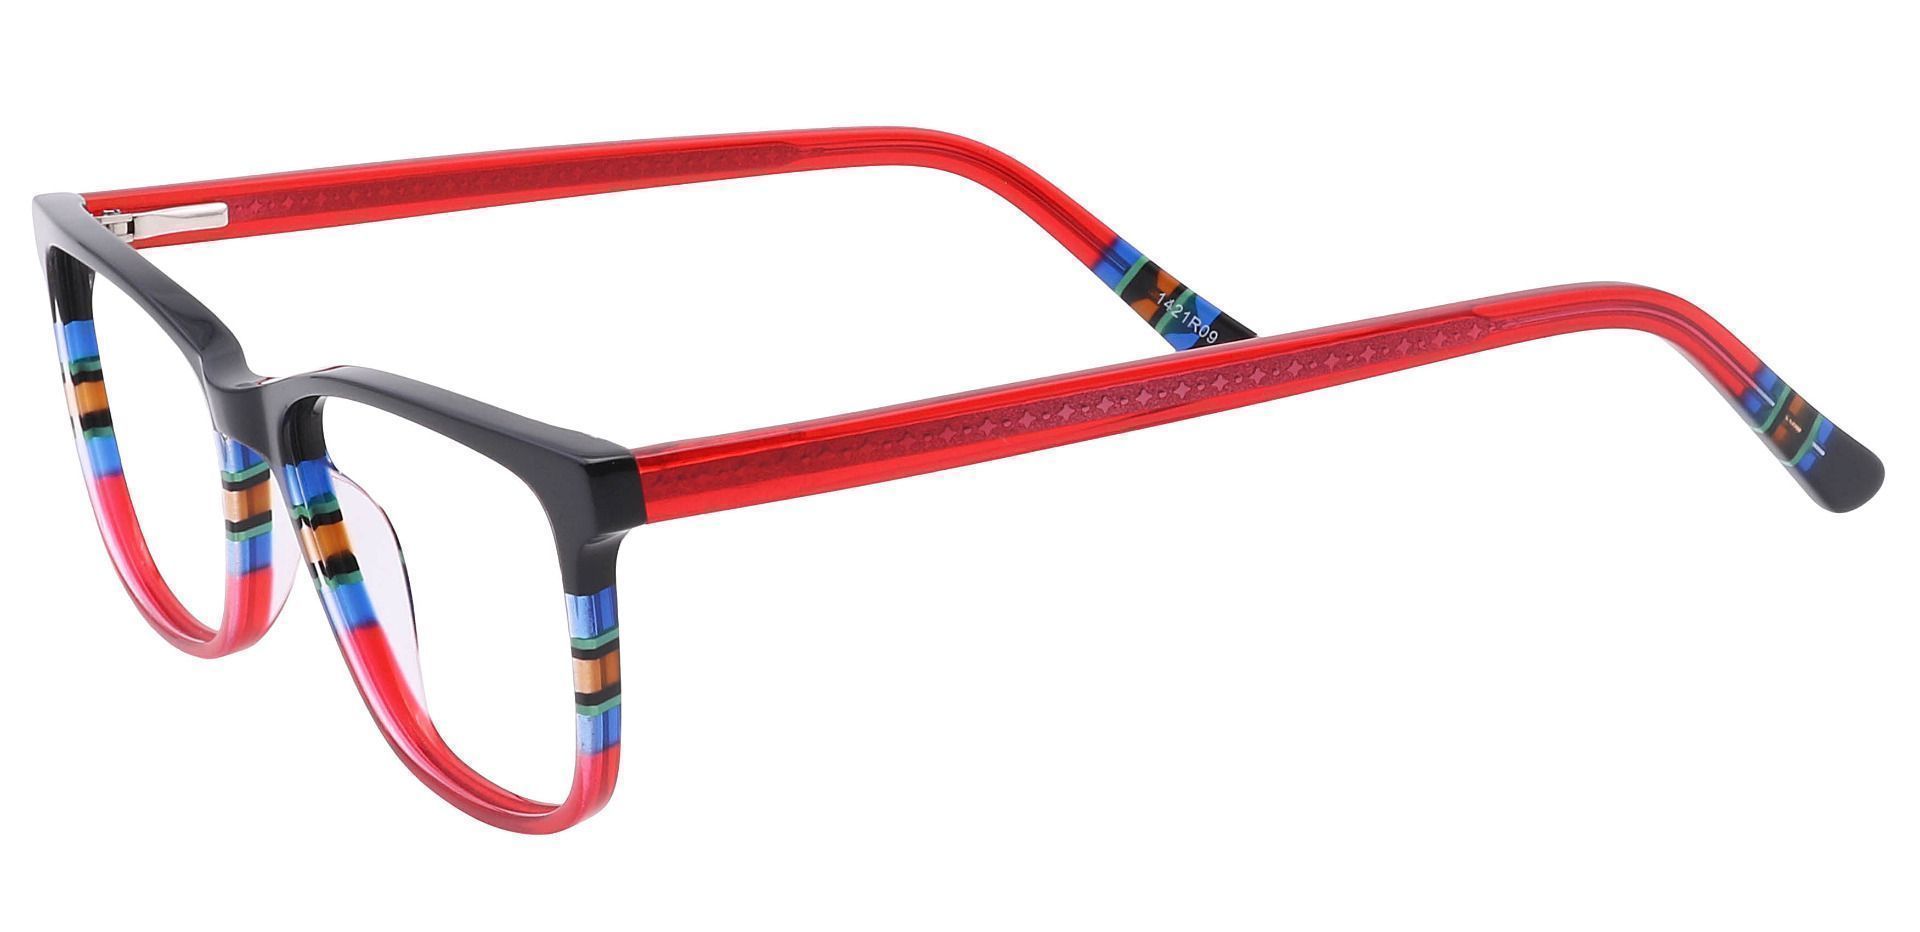 Taffie Oval Reading Glasses - Red